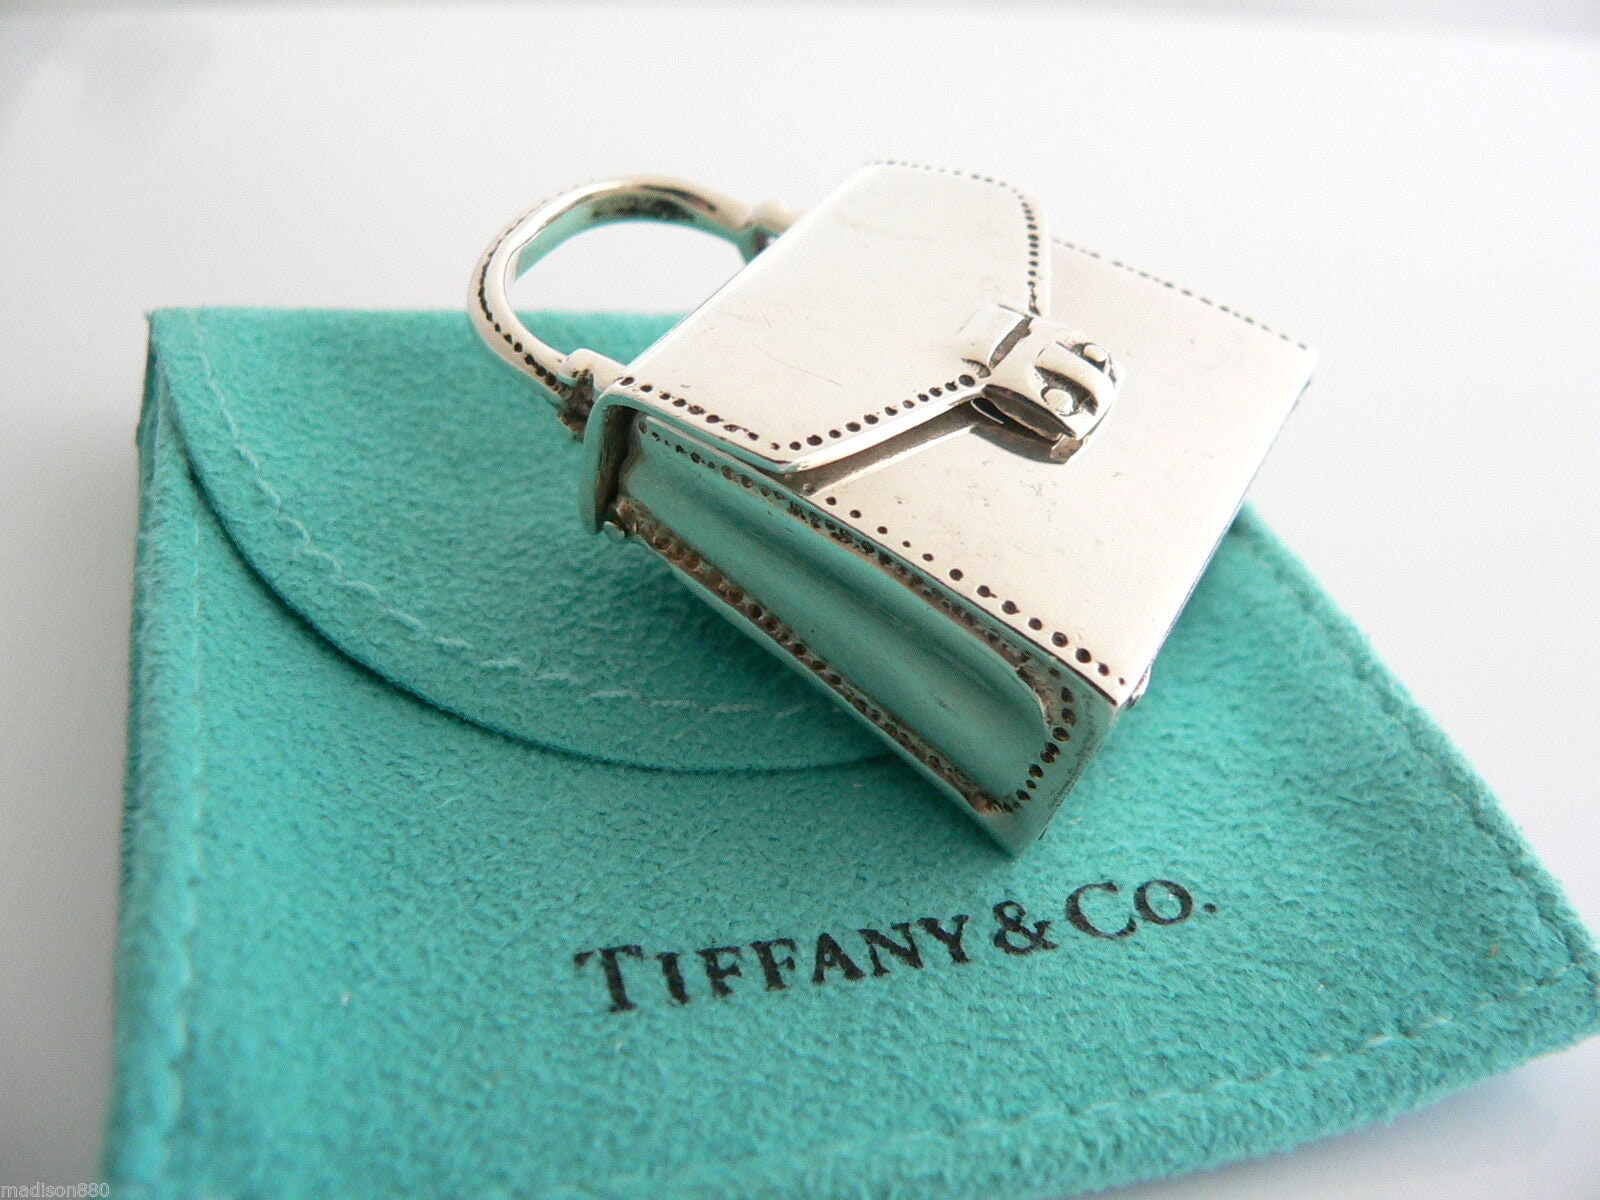 NYJEWEL Vintage Tiffany & Co 925 Sterling Silver Engraved Pill Box